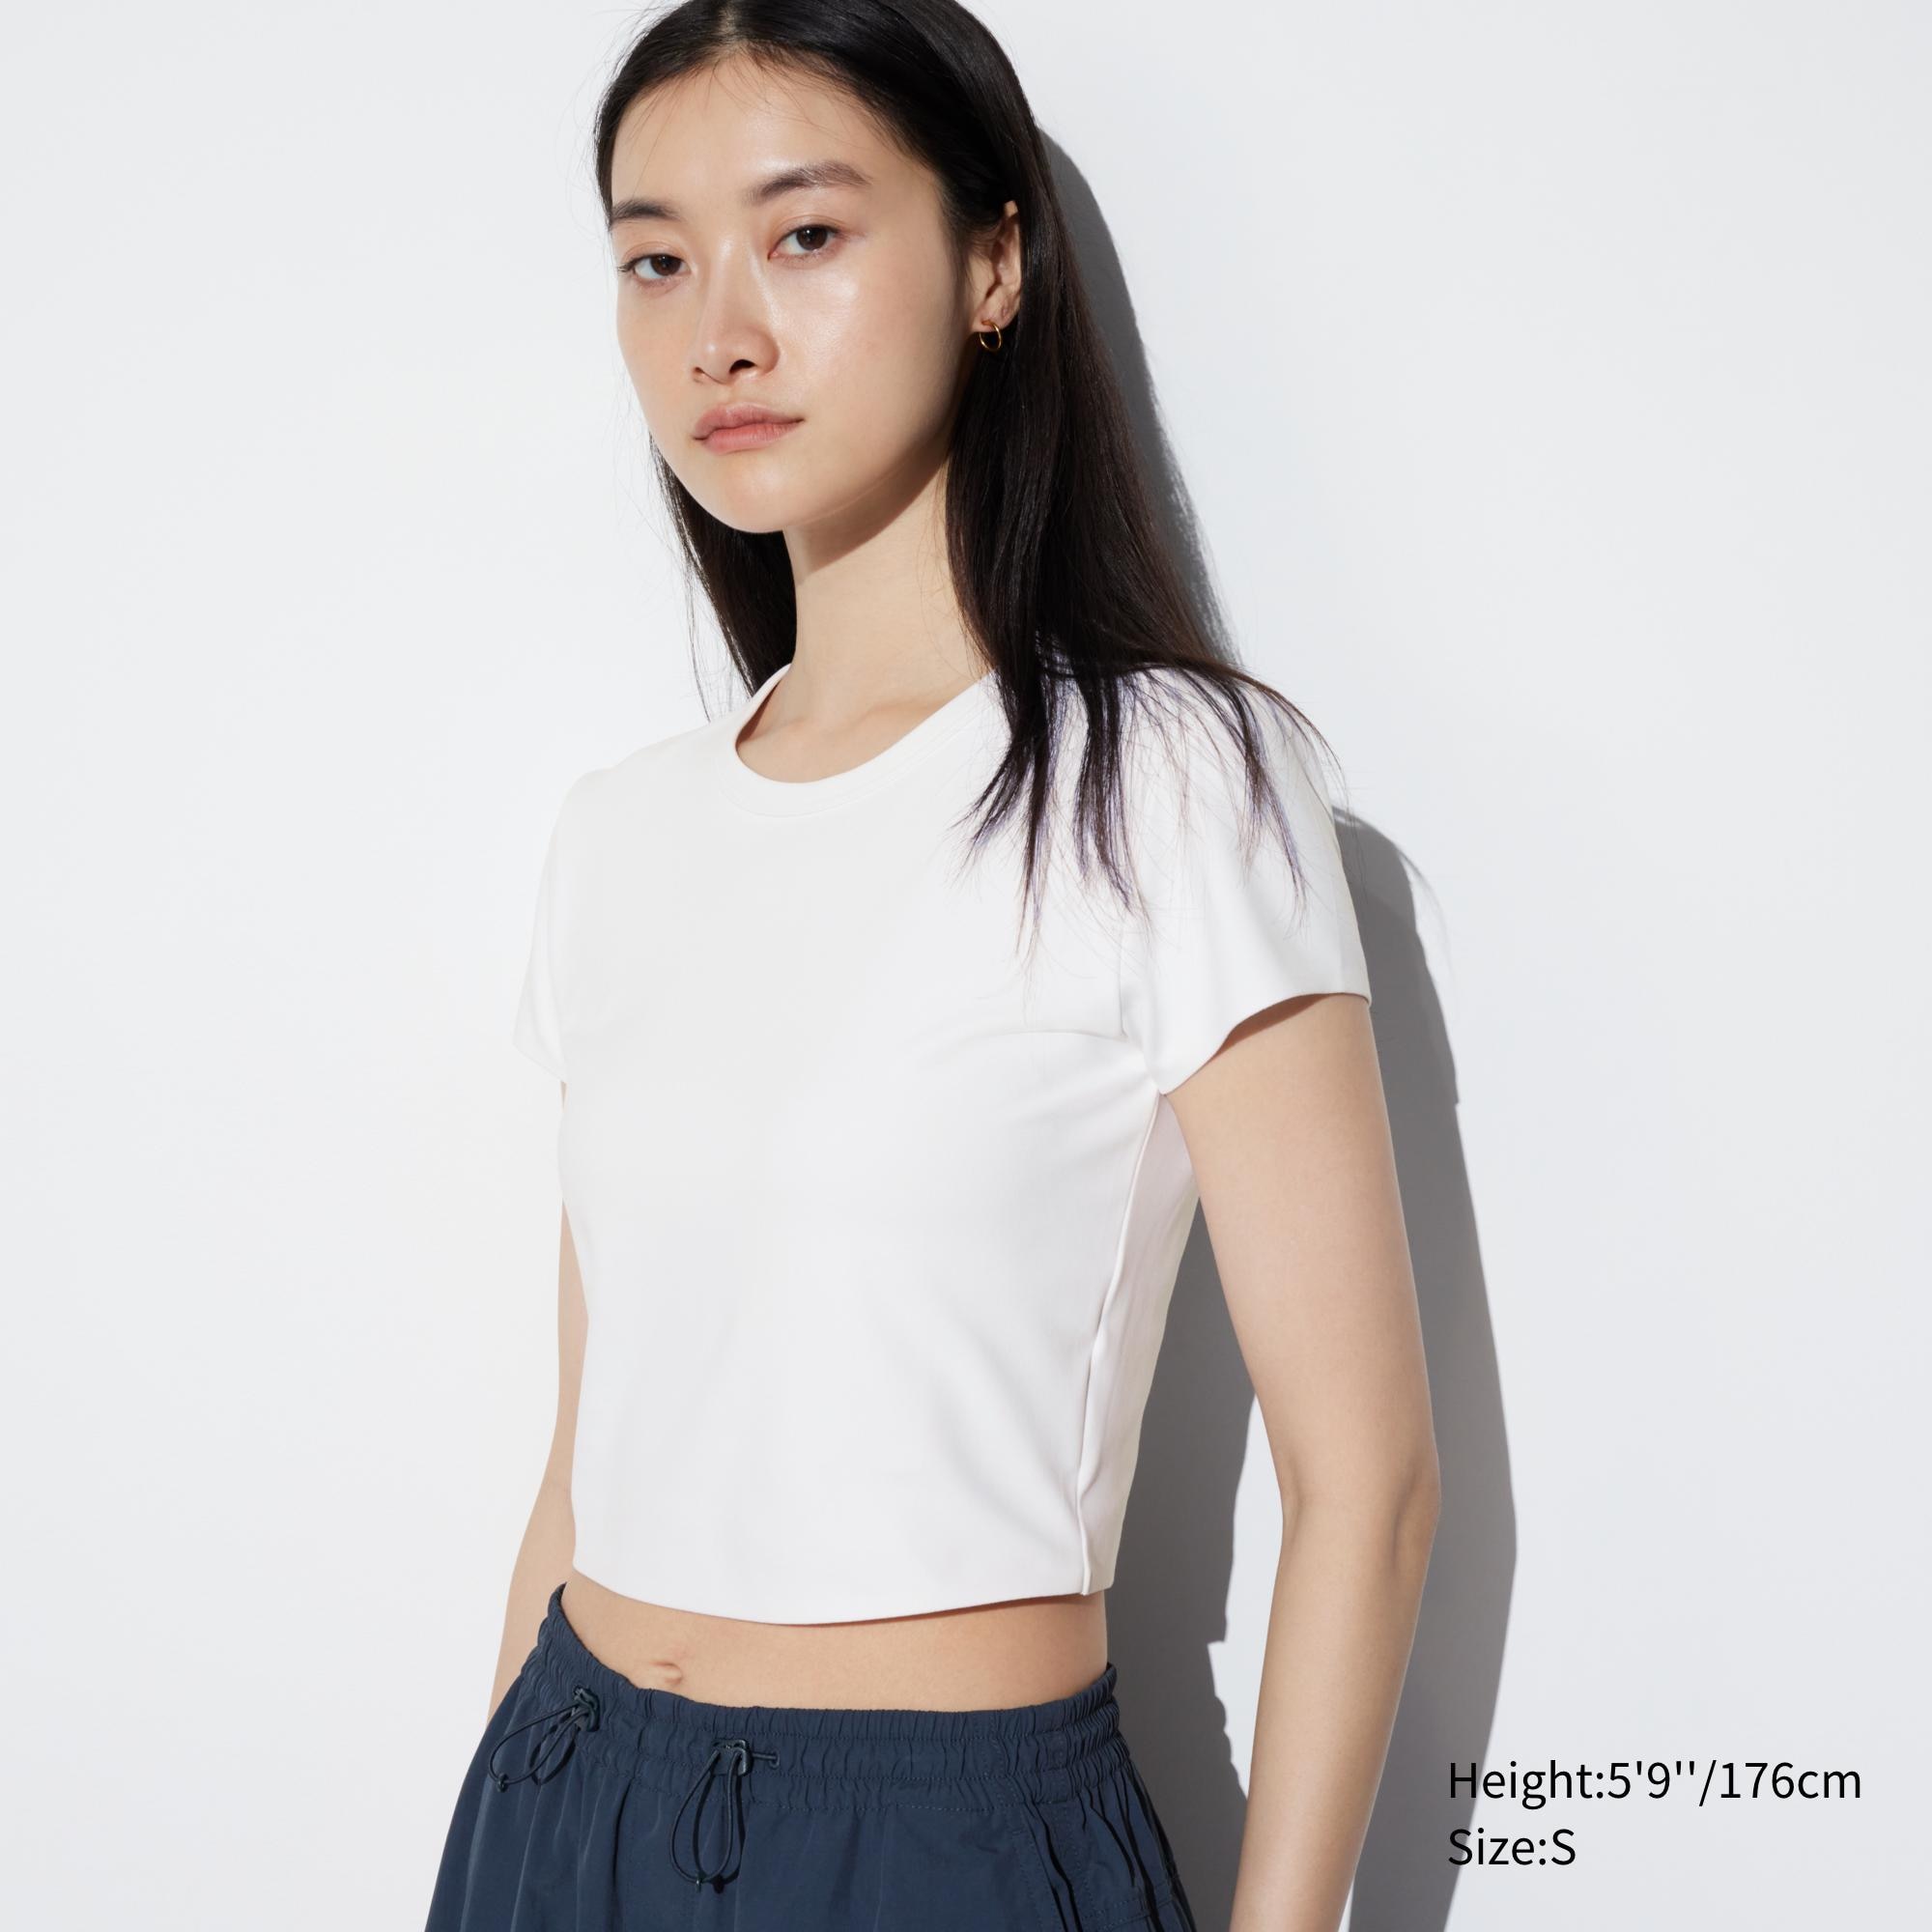 Ultra Stretch AIRism Cropped Short-Sleeve T-Shirt